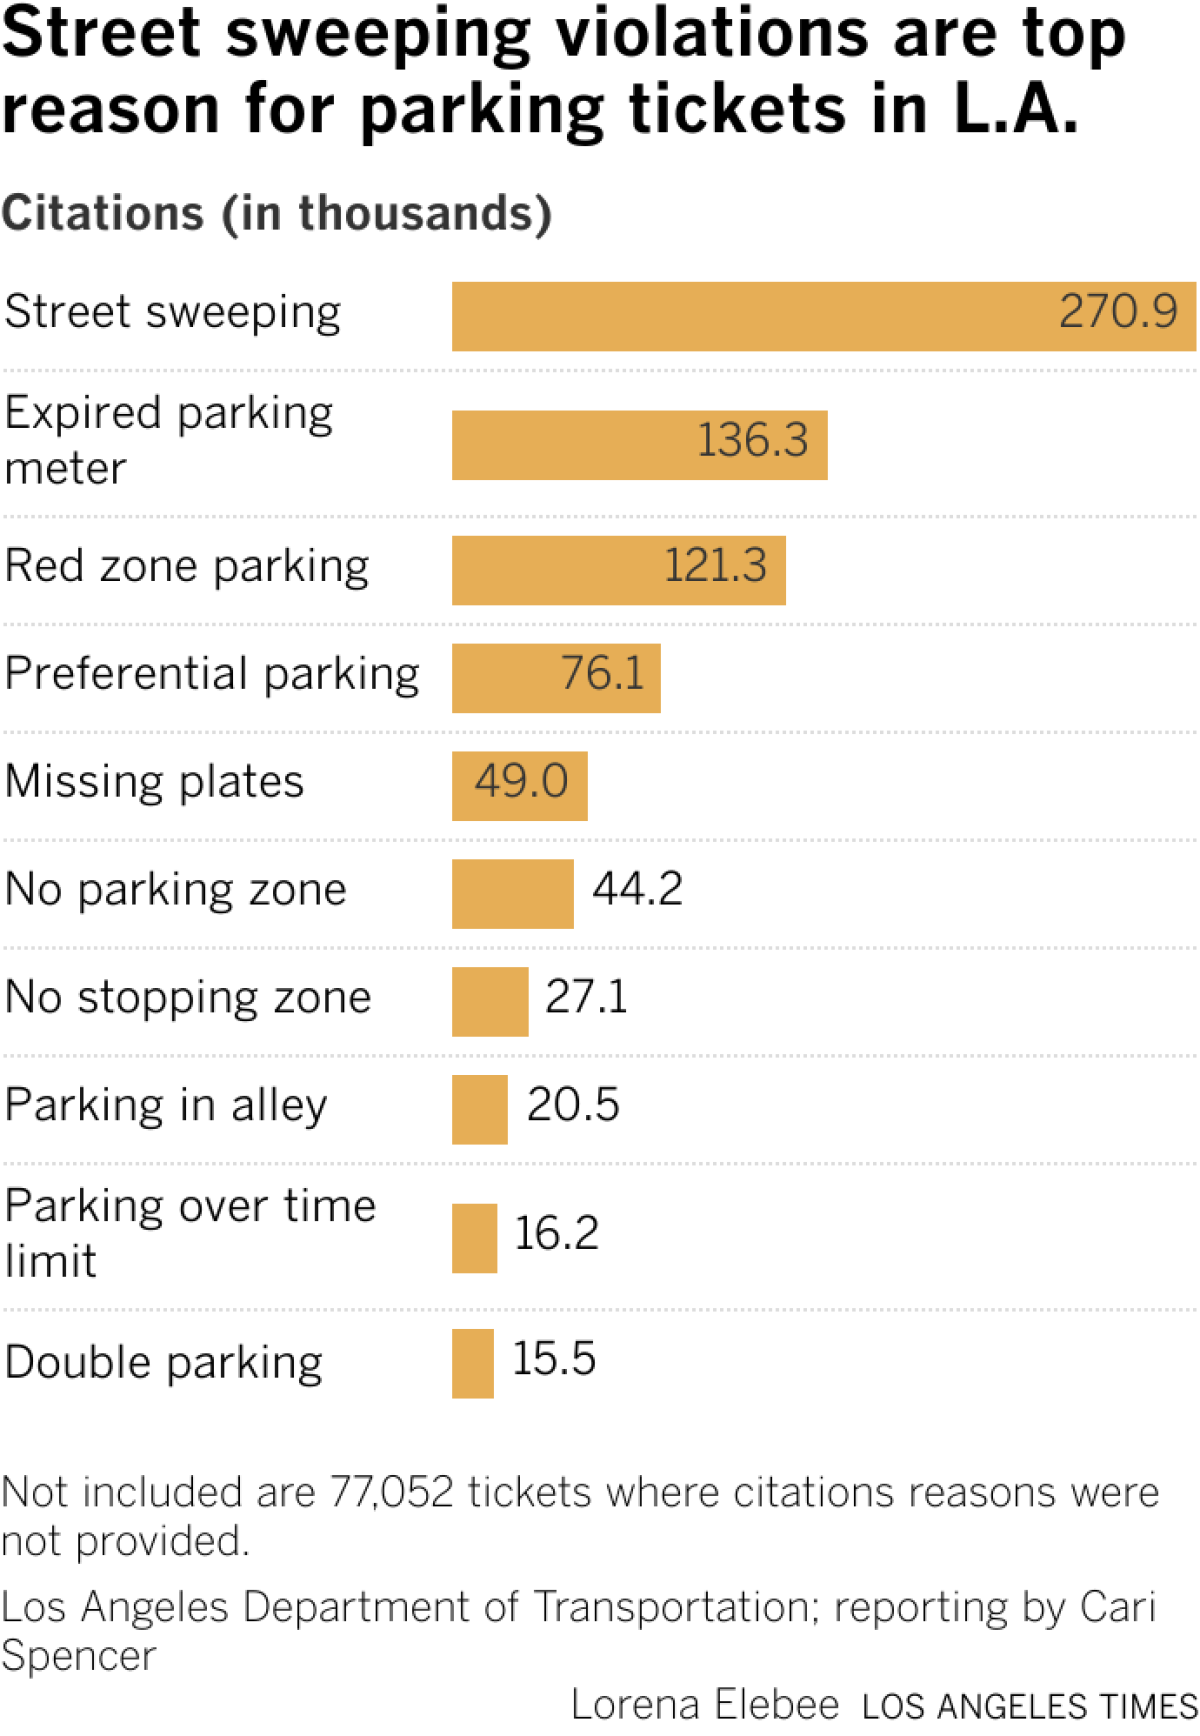 Chart showing street sweeping and expired parking meter as leading reasons why drivers get cited, followed by closely by red zoned parking.